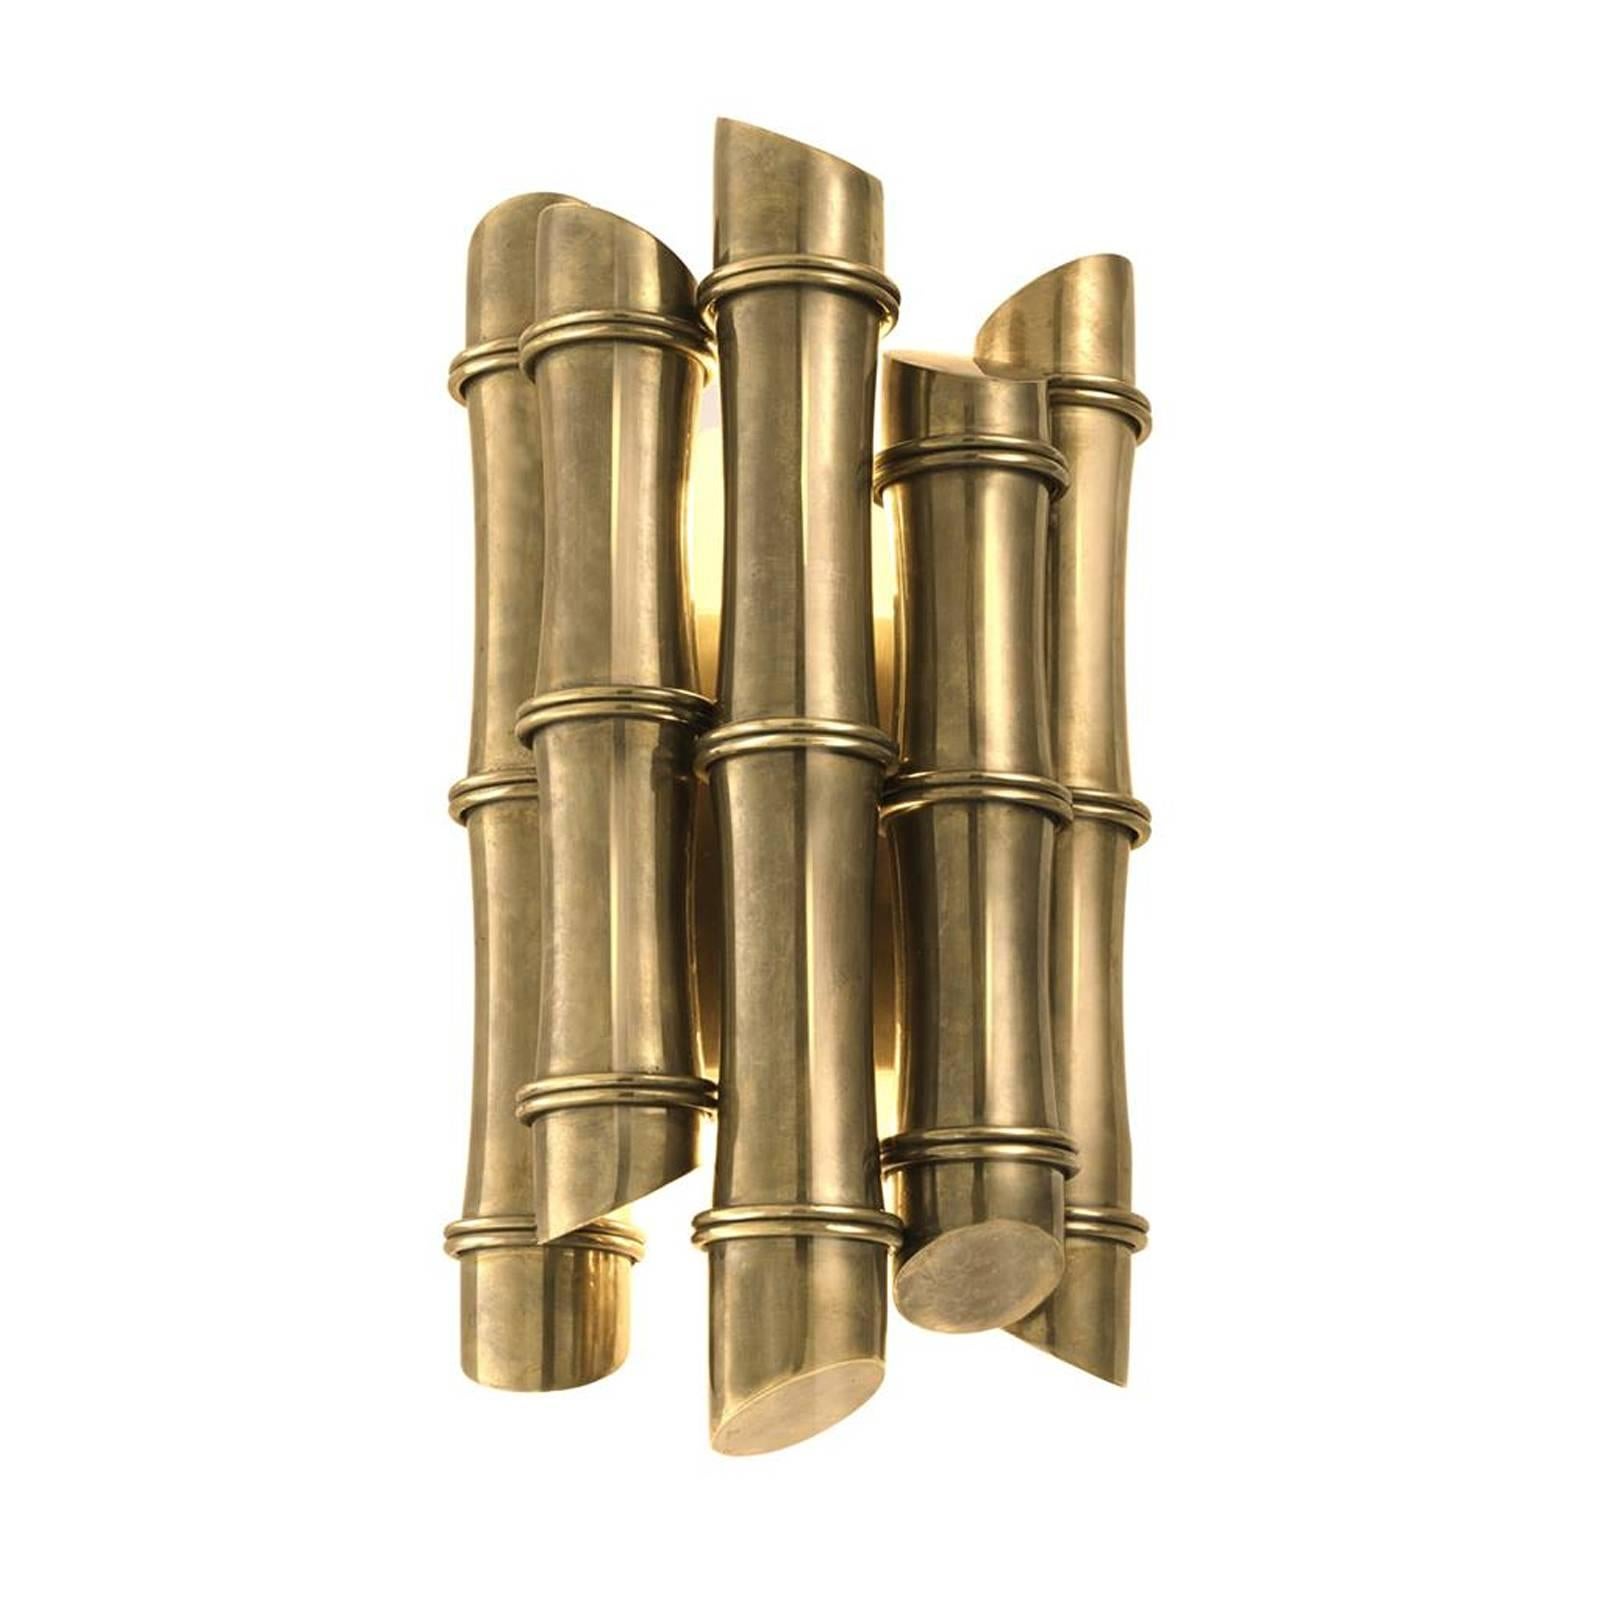 Wall light Spa with structure in vintage brass finish.
2 bulbs, lamp holder type E14, max 40 watt. Bulbs
not included. Also available with structure in polished 
stainless steel. Also available in table lamp Spa.
